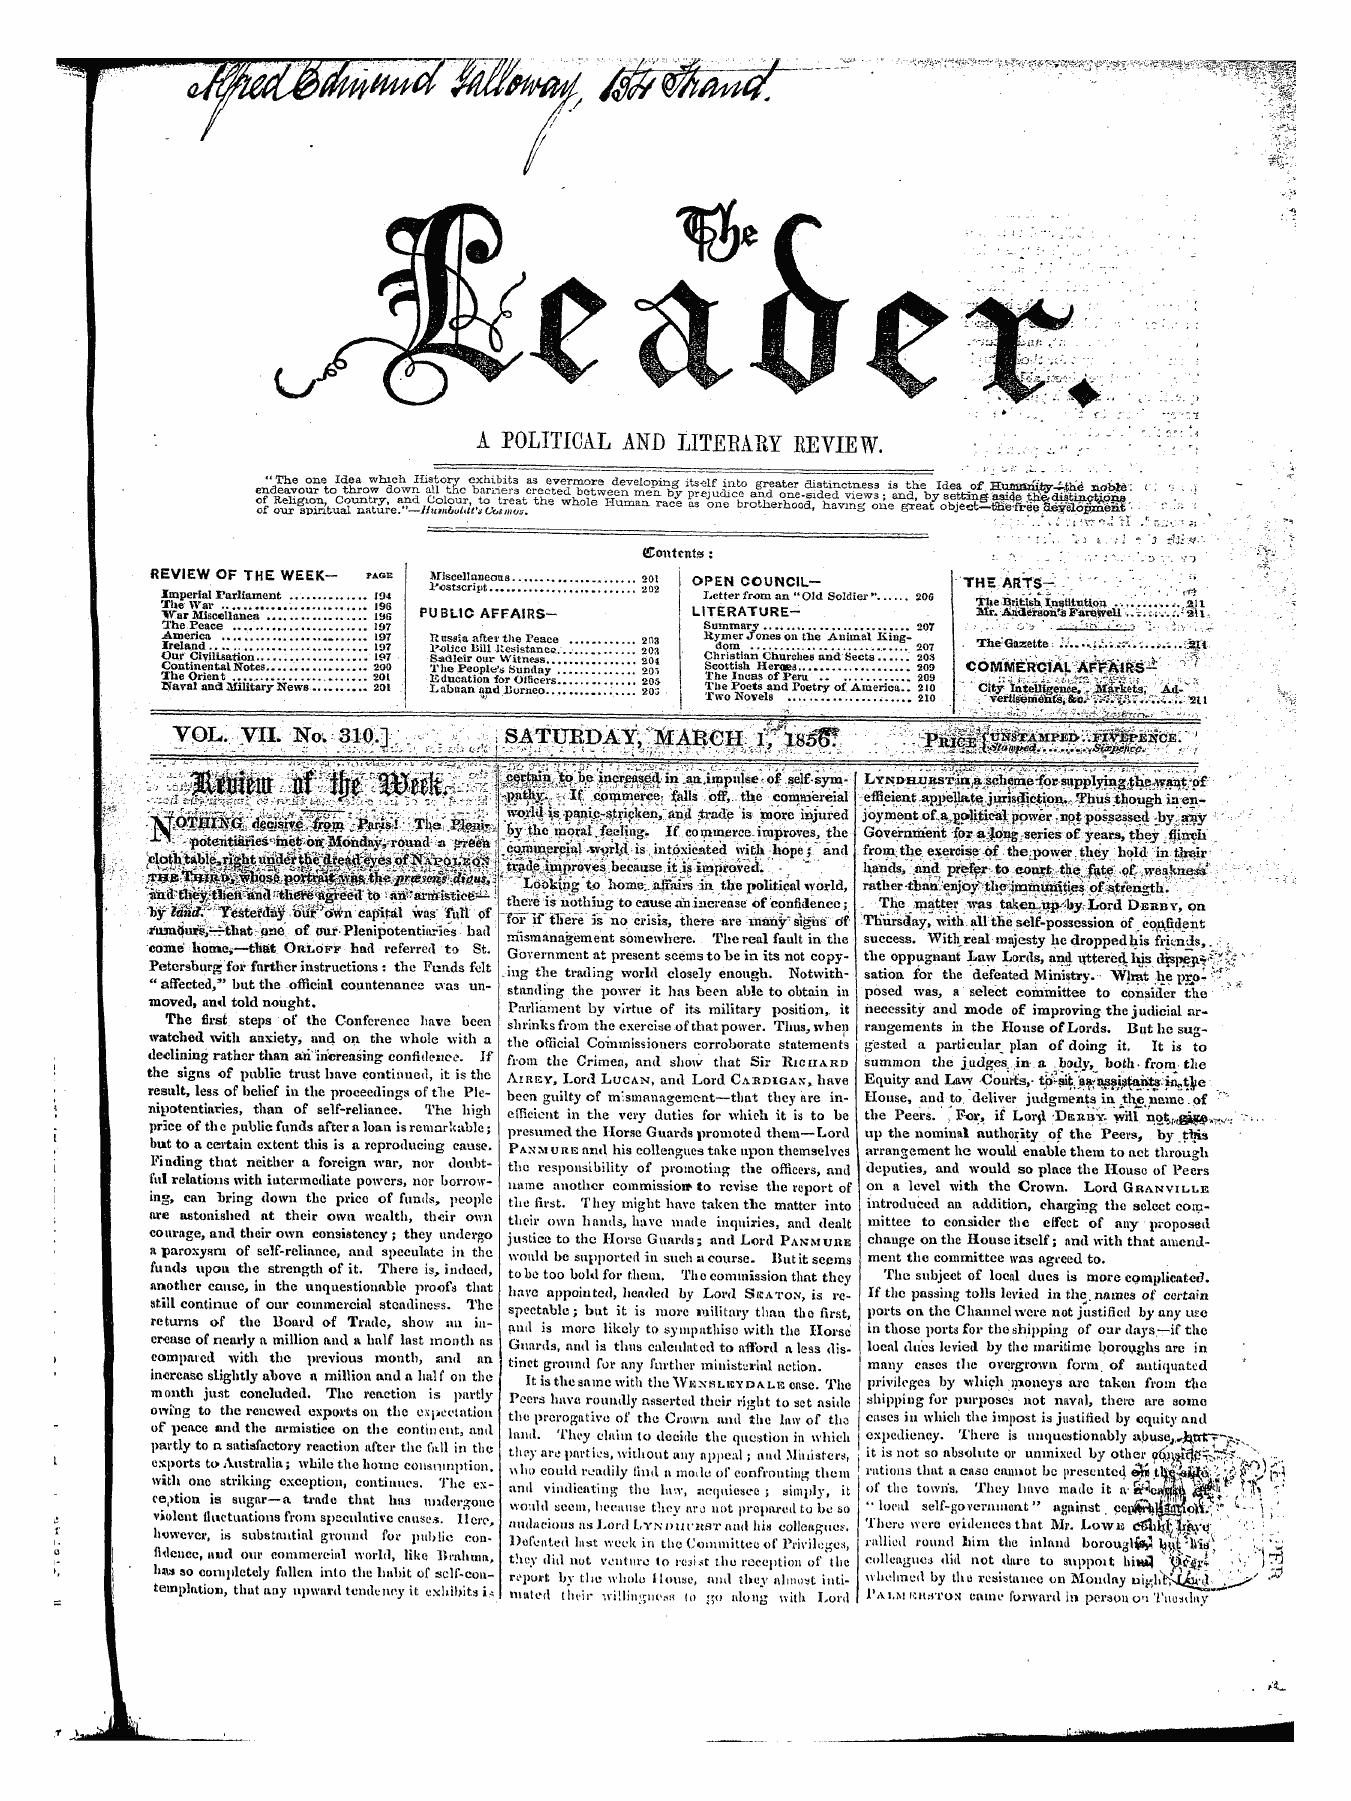 Leader (1850-1860): jS F Y, 1st edition - ^^ 7 "' ~ ^R ¦ . • :*• -. ¦ * R , : . - 1 Political And Literacy Eeyiew. ; ; . , , ^ ¦" '